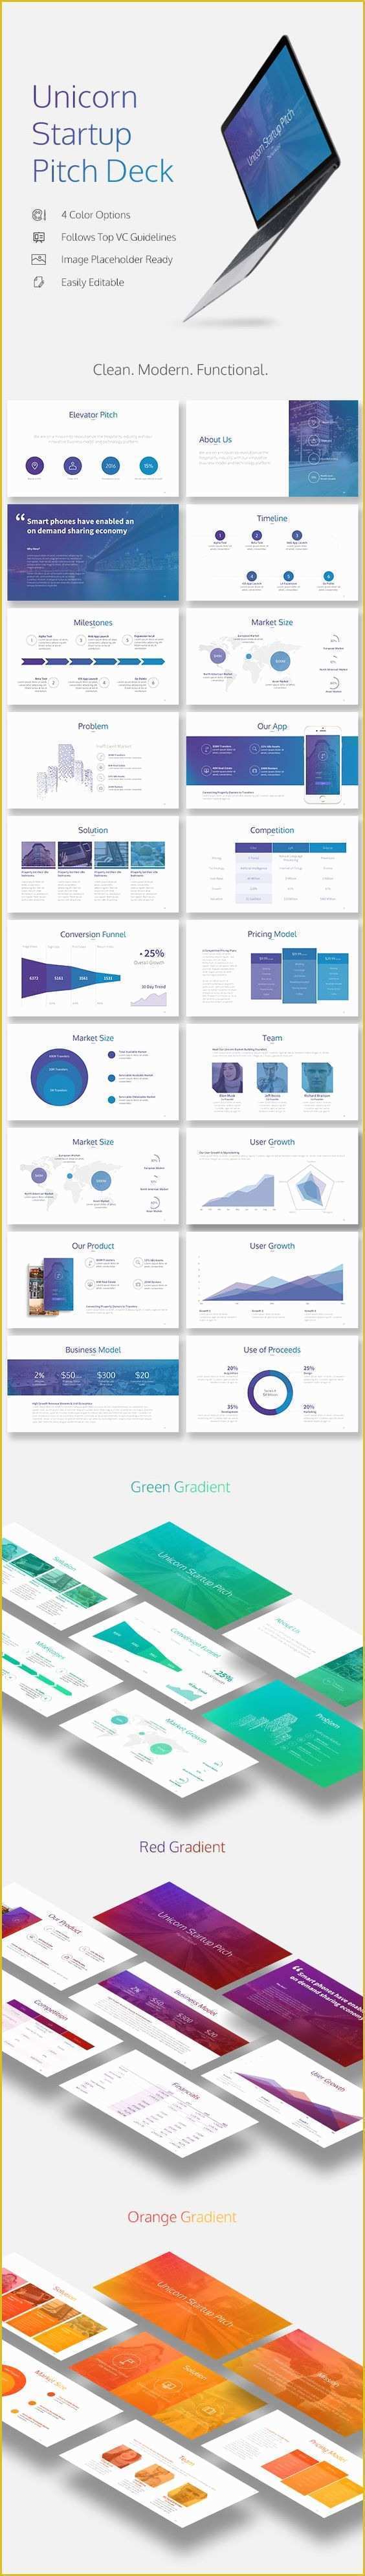 Pitch Deck Template Powerpoint Free Download Of Powerpoint Startups and Decks On Pinterest